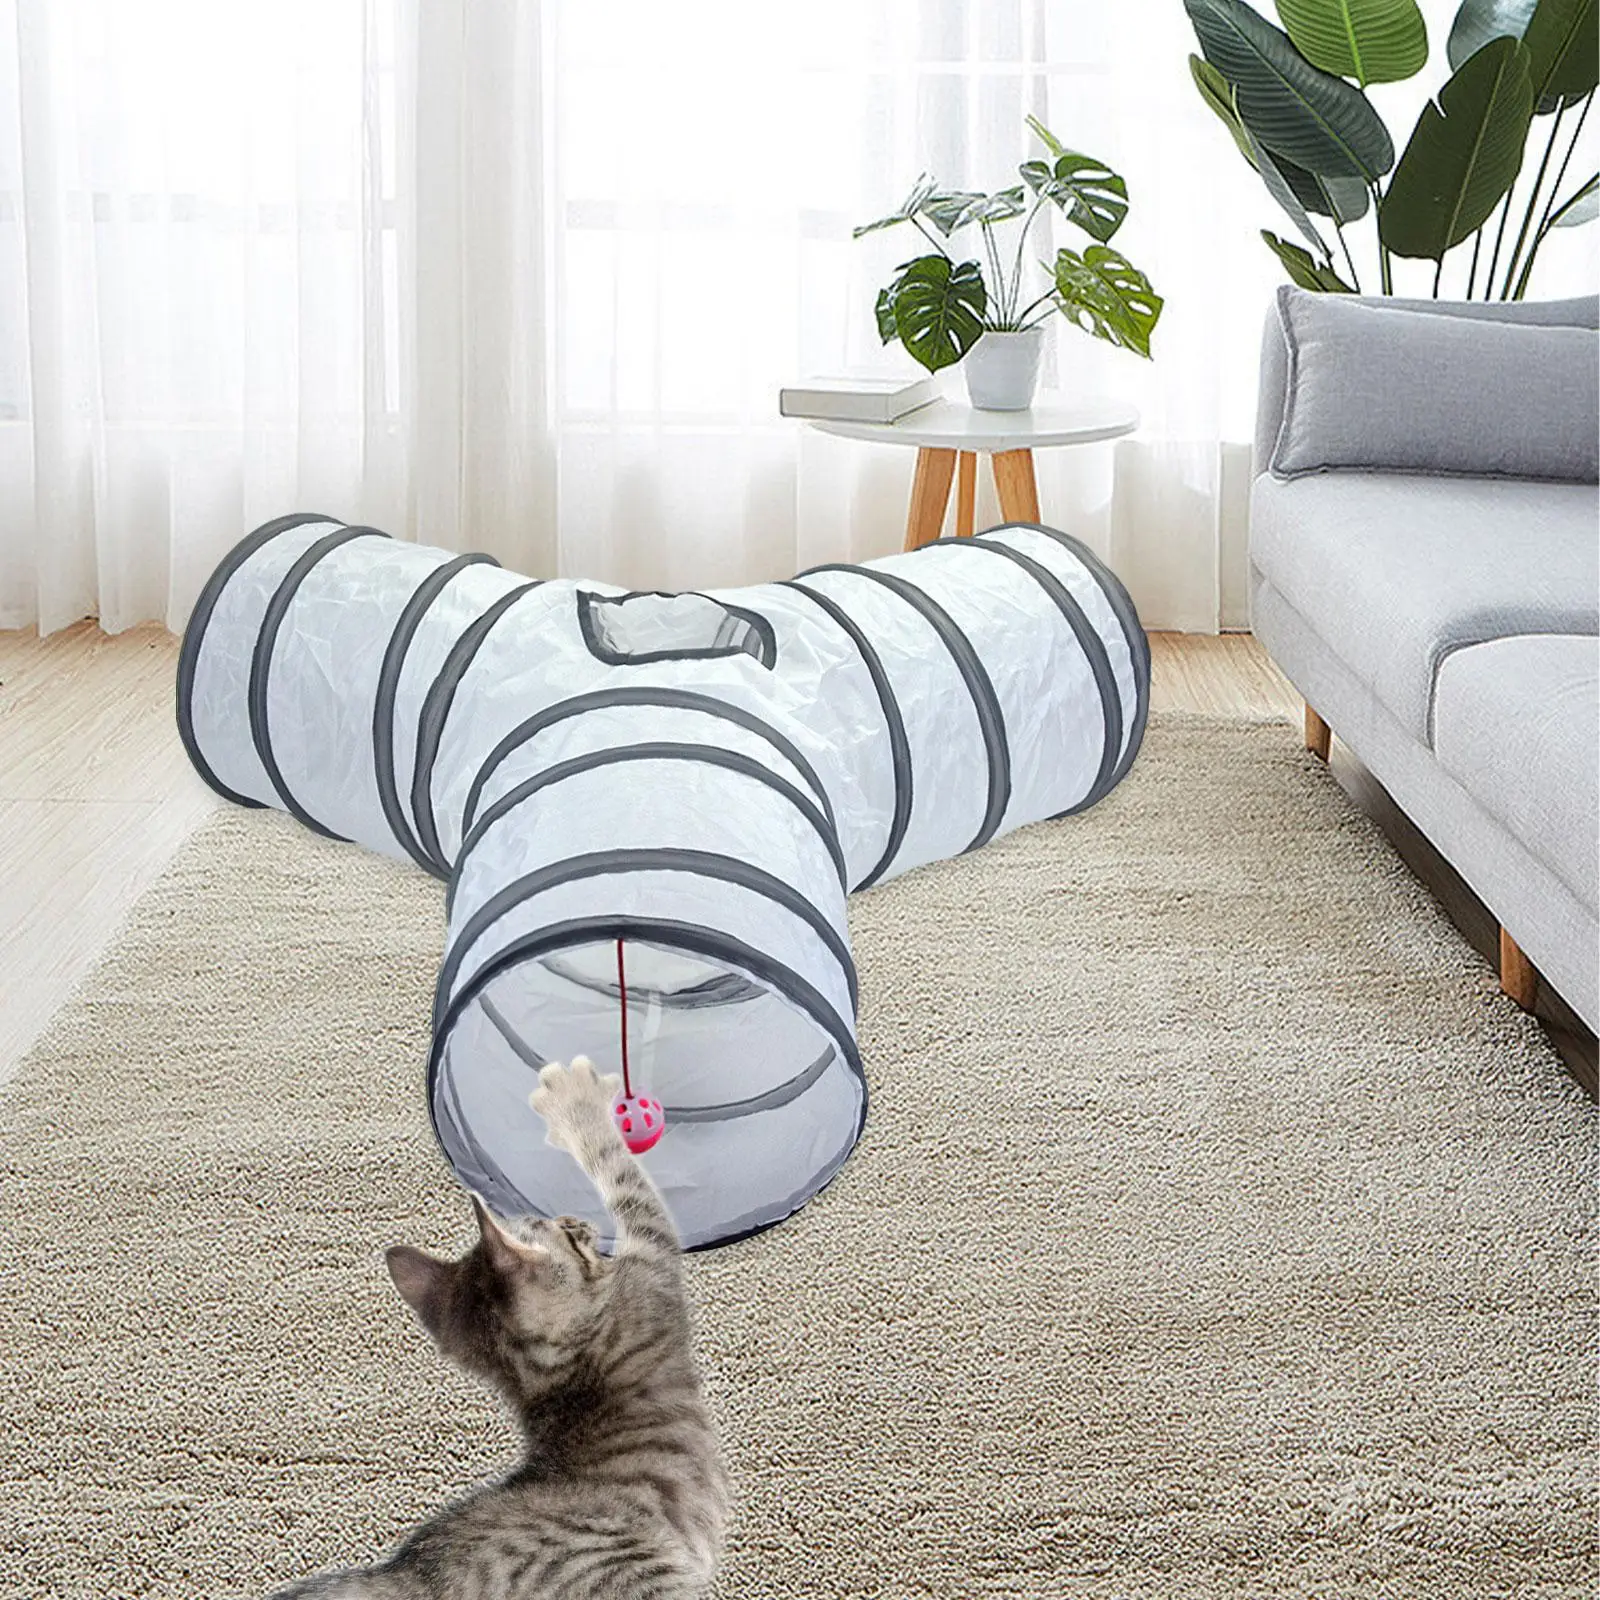 Collapsible Cats Tunnel Durable Structure Tear Resistant Kitten Playing Toy for Puppy Rabbit Guinea Pig Ferrets Training